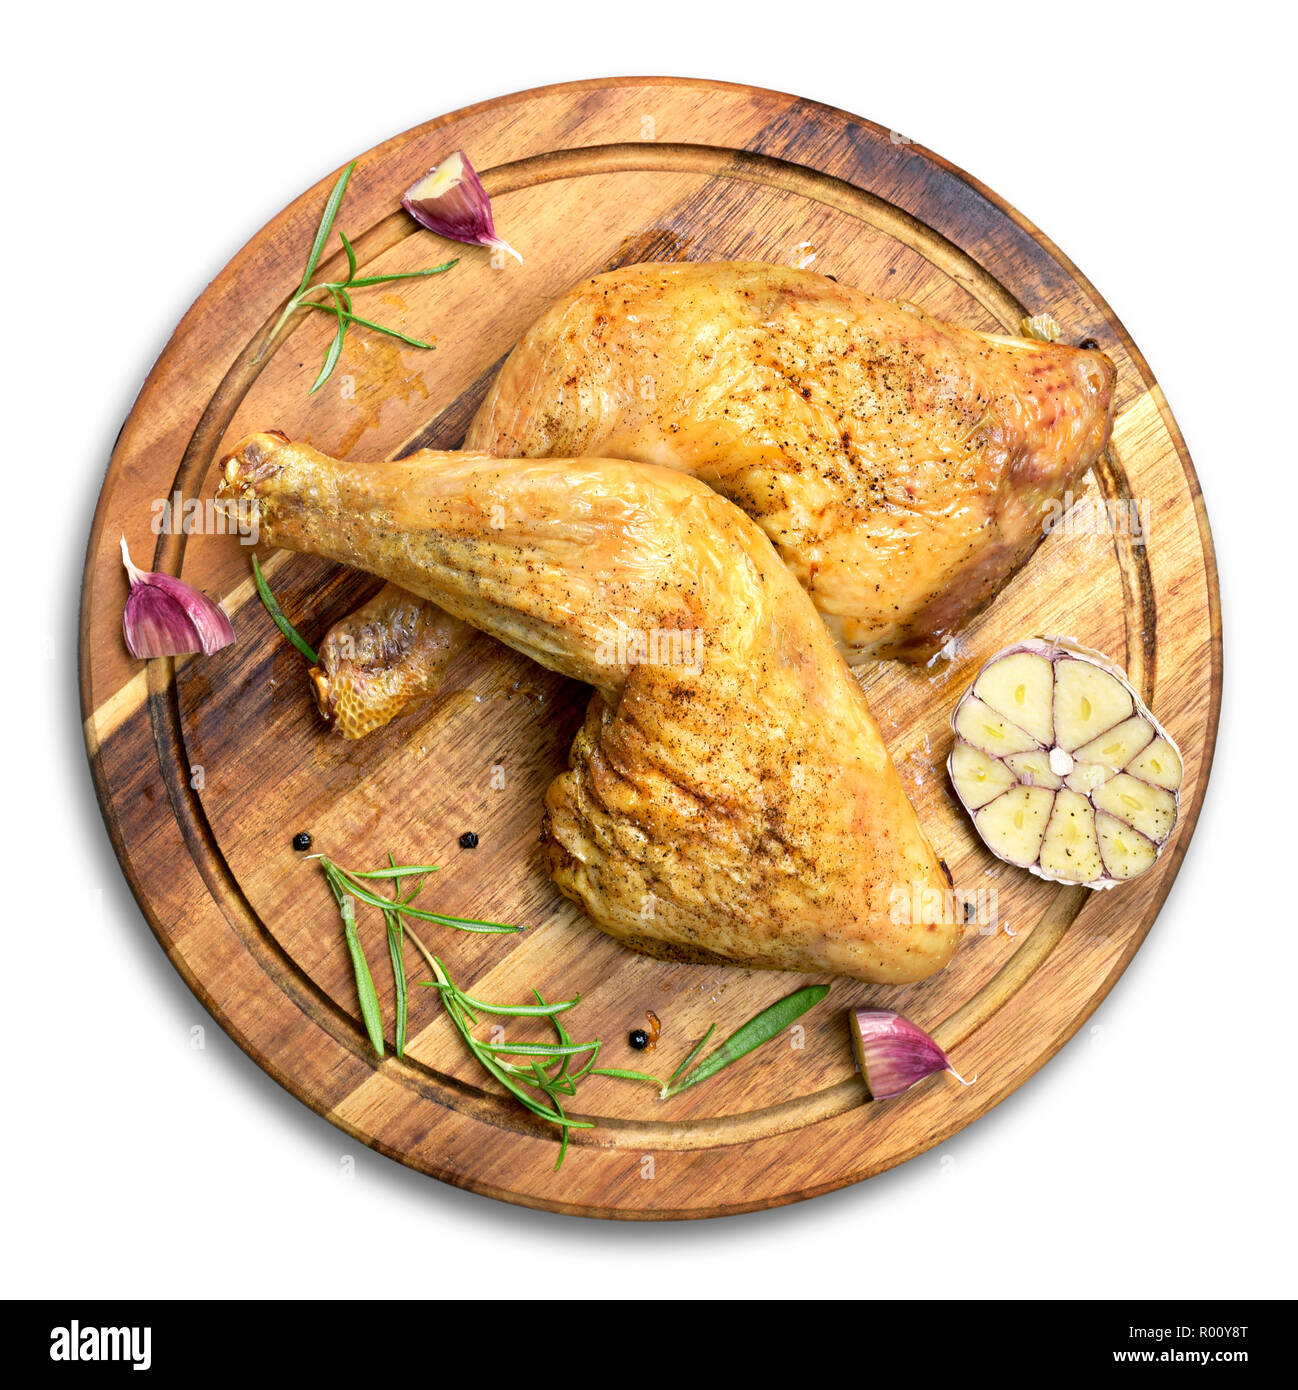 Delicious roast chicken legs or chicken drumsticks on a wooden cutting board. High angle view and fresh rosemary and garlic. Isolated on white backgro Stock Photo